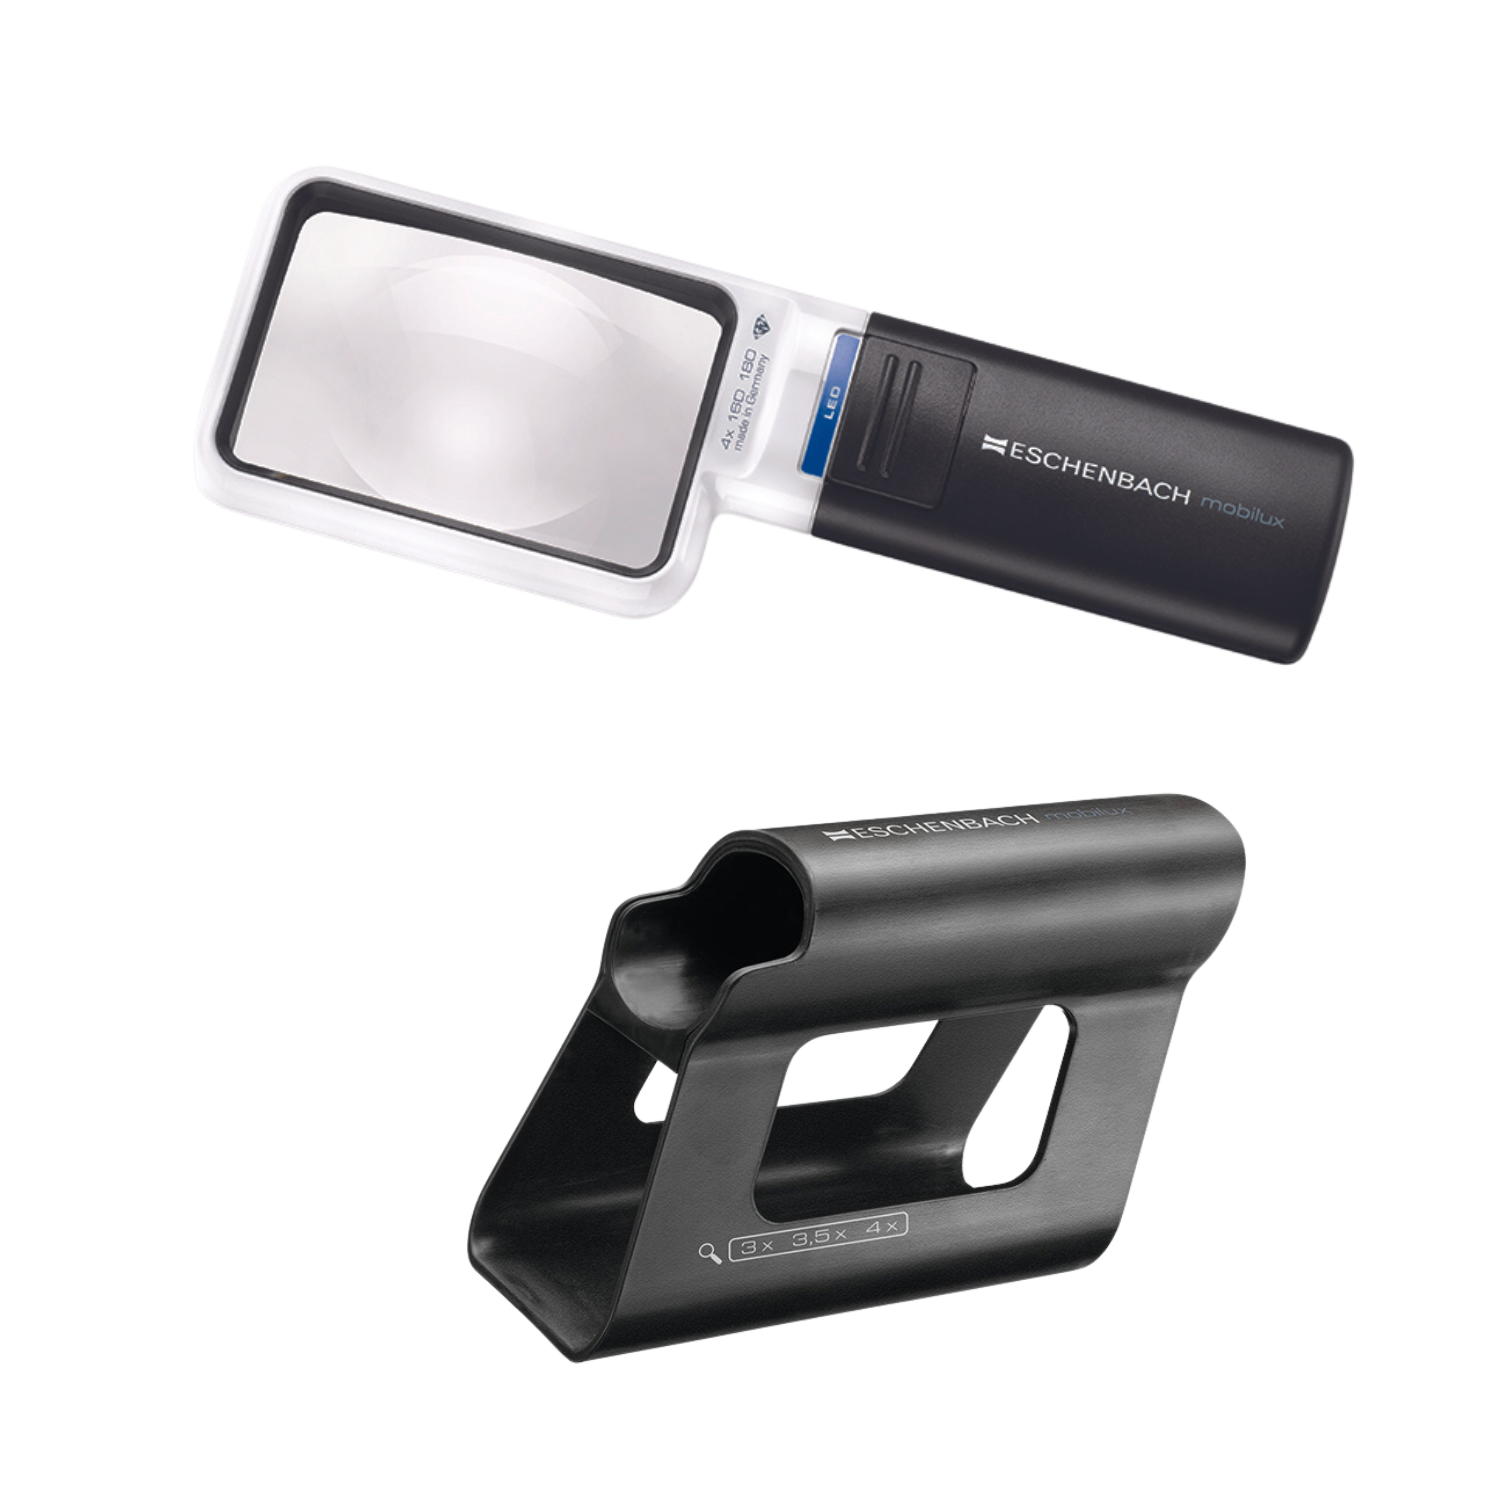 Image of the rectangular 4x Mobilux handheld magnifier with Mobase stand from Eschenbach.